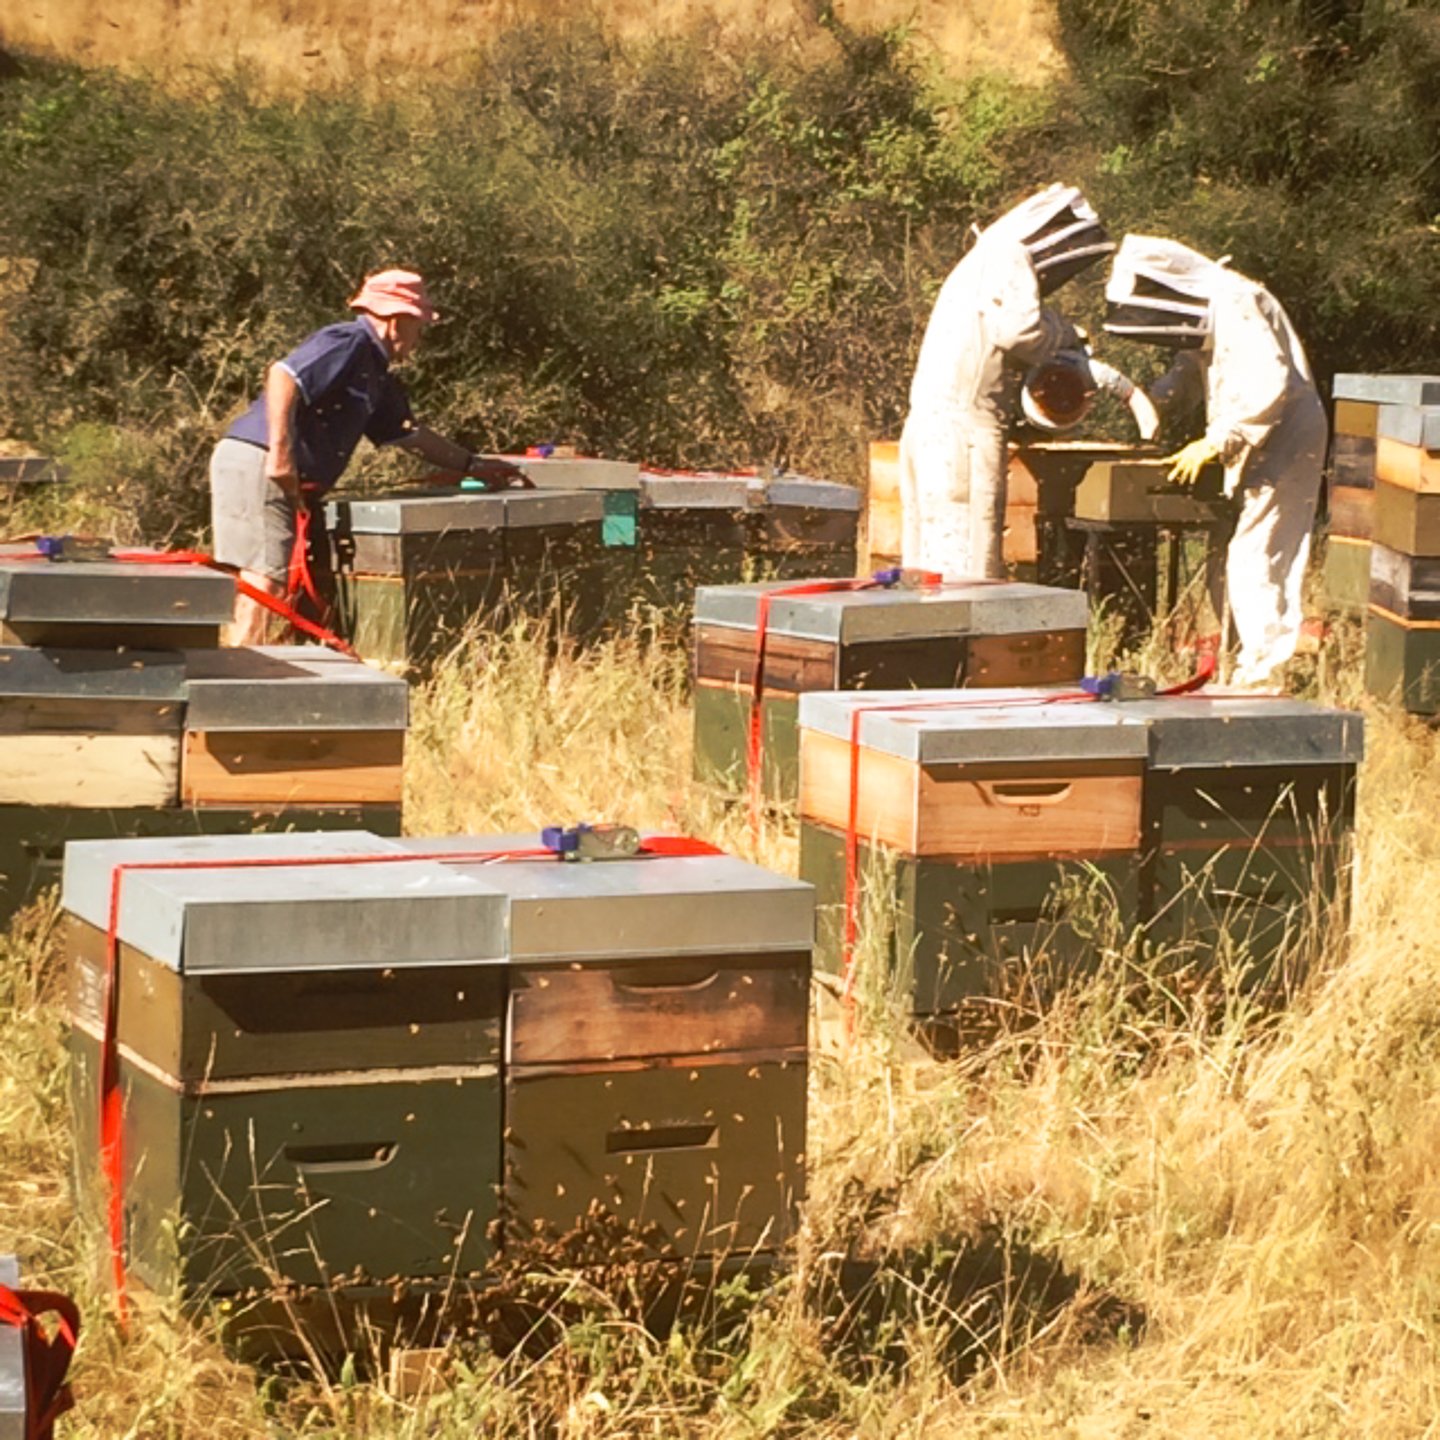 Murray's father, Merv tending to hives without protection, while other beekeepers are fully kitted up